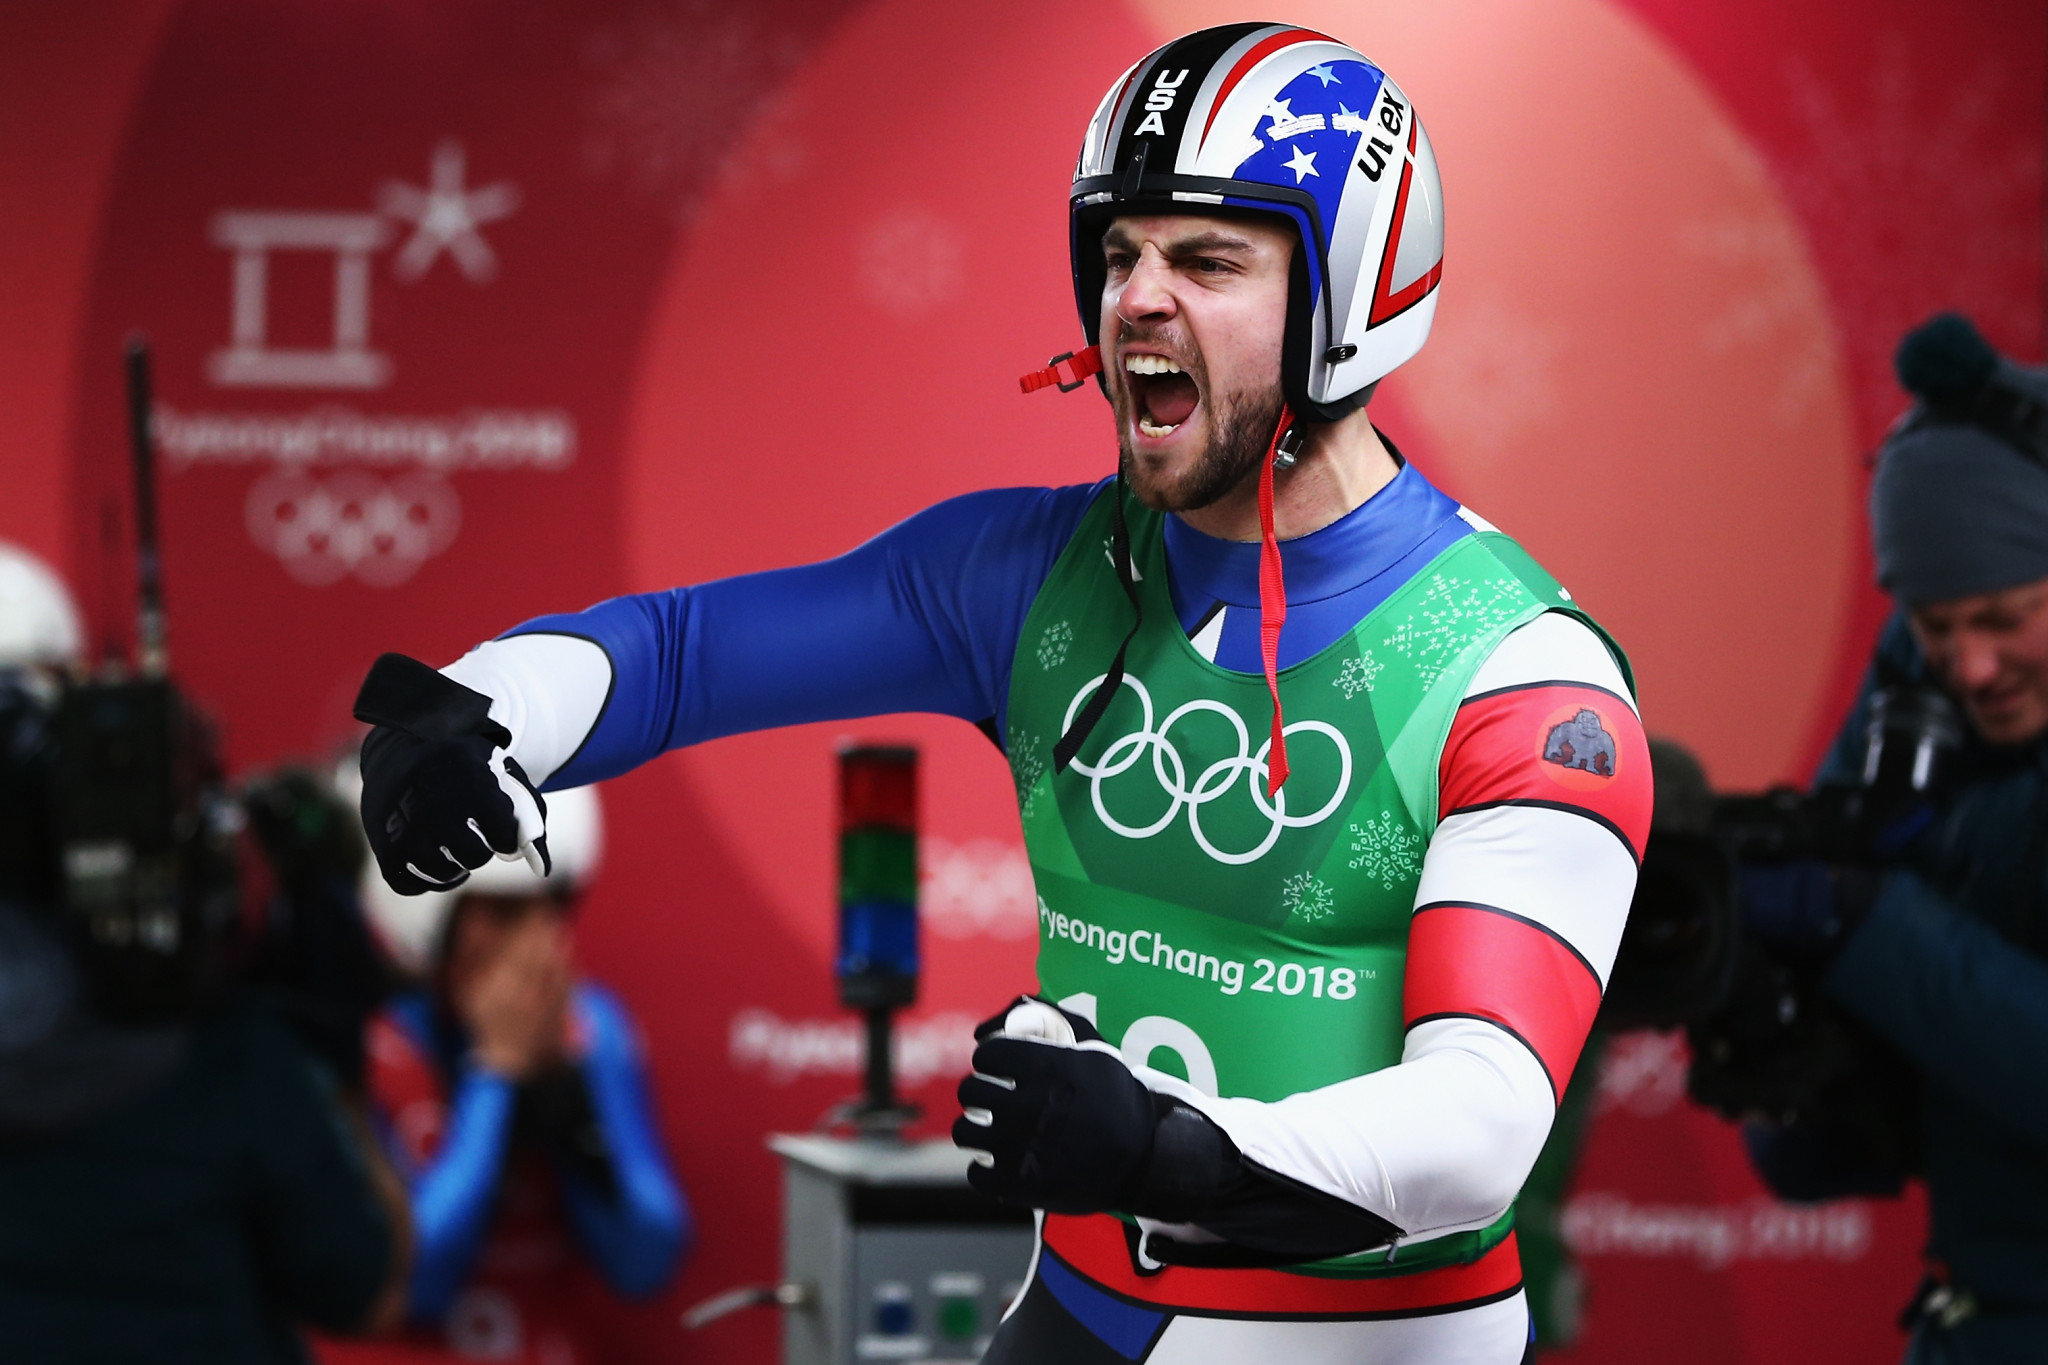 Chris Mazdzer won an Olympic silver medal at Pyeongchang 2018 ©Getty Images